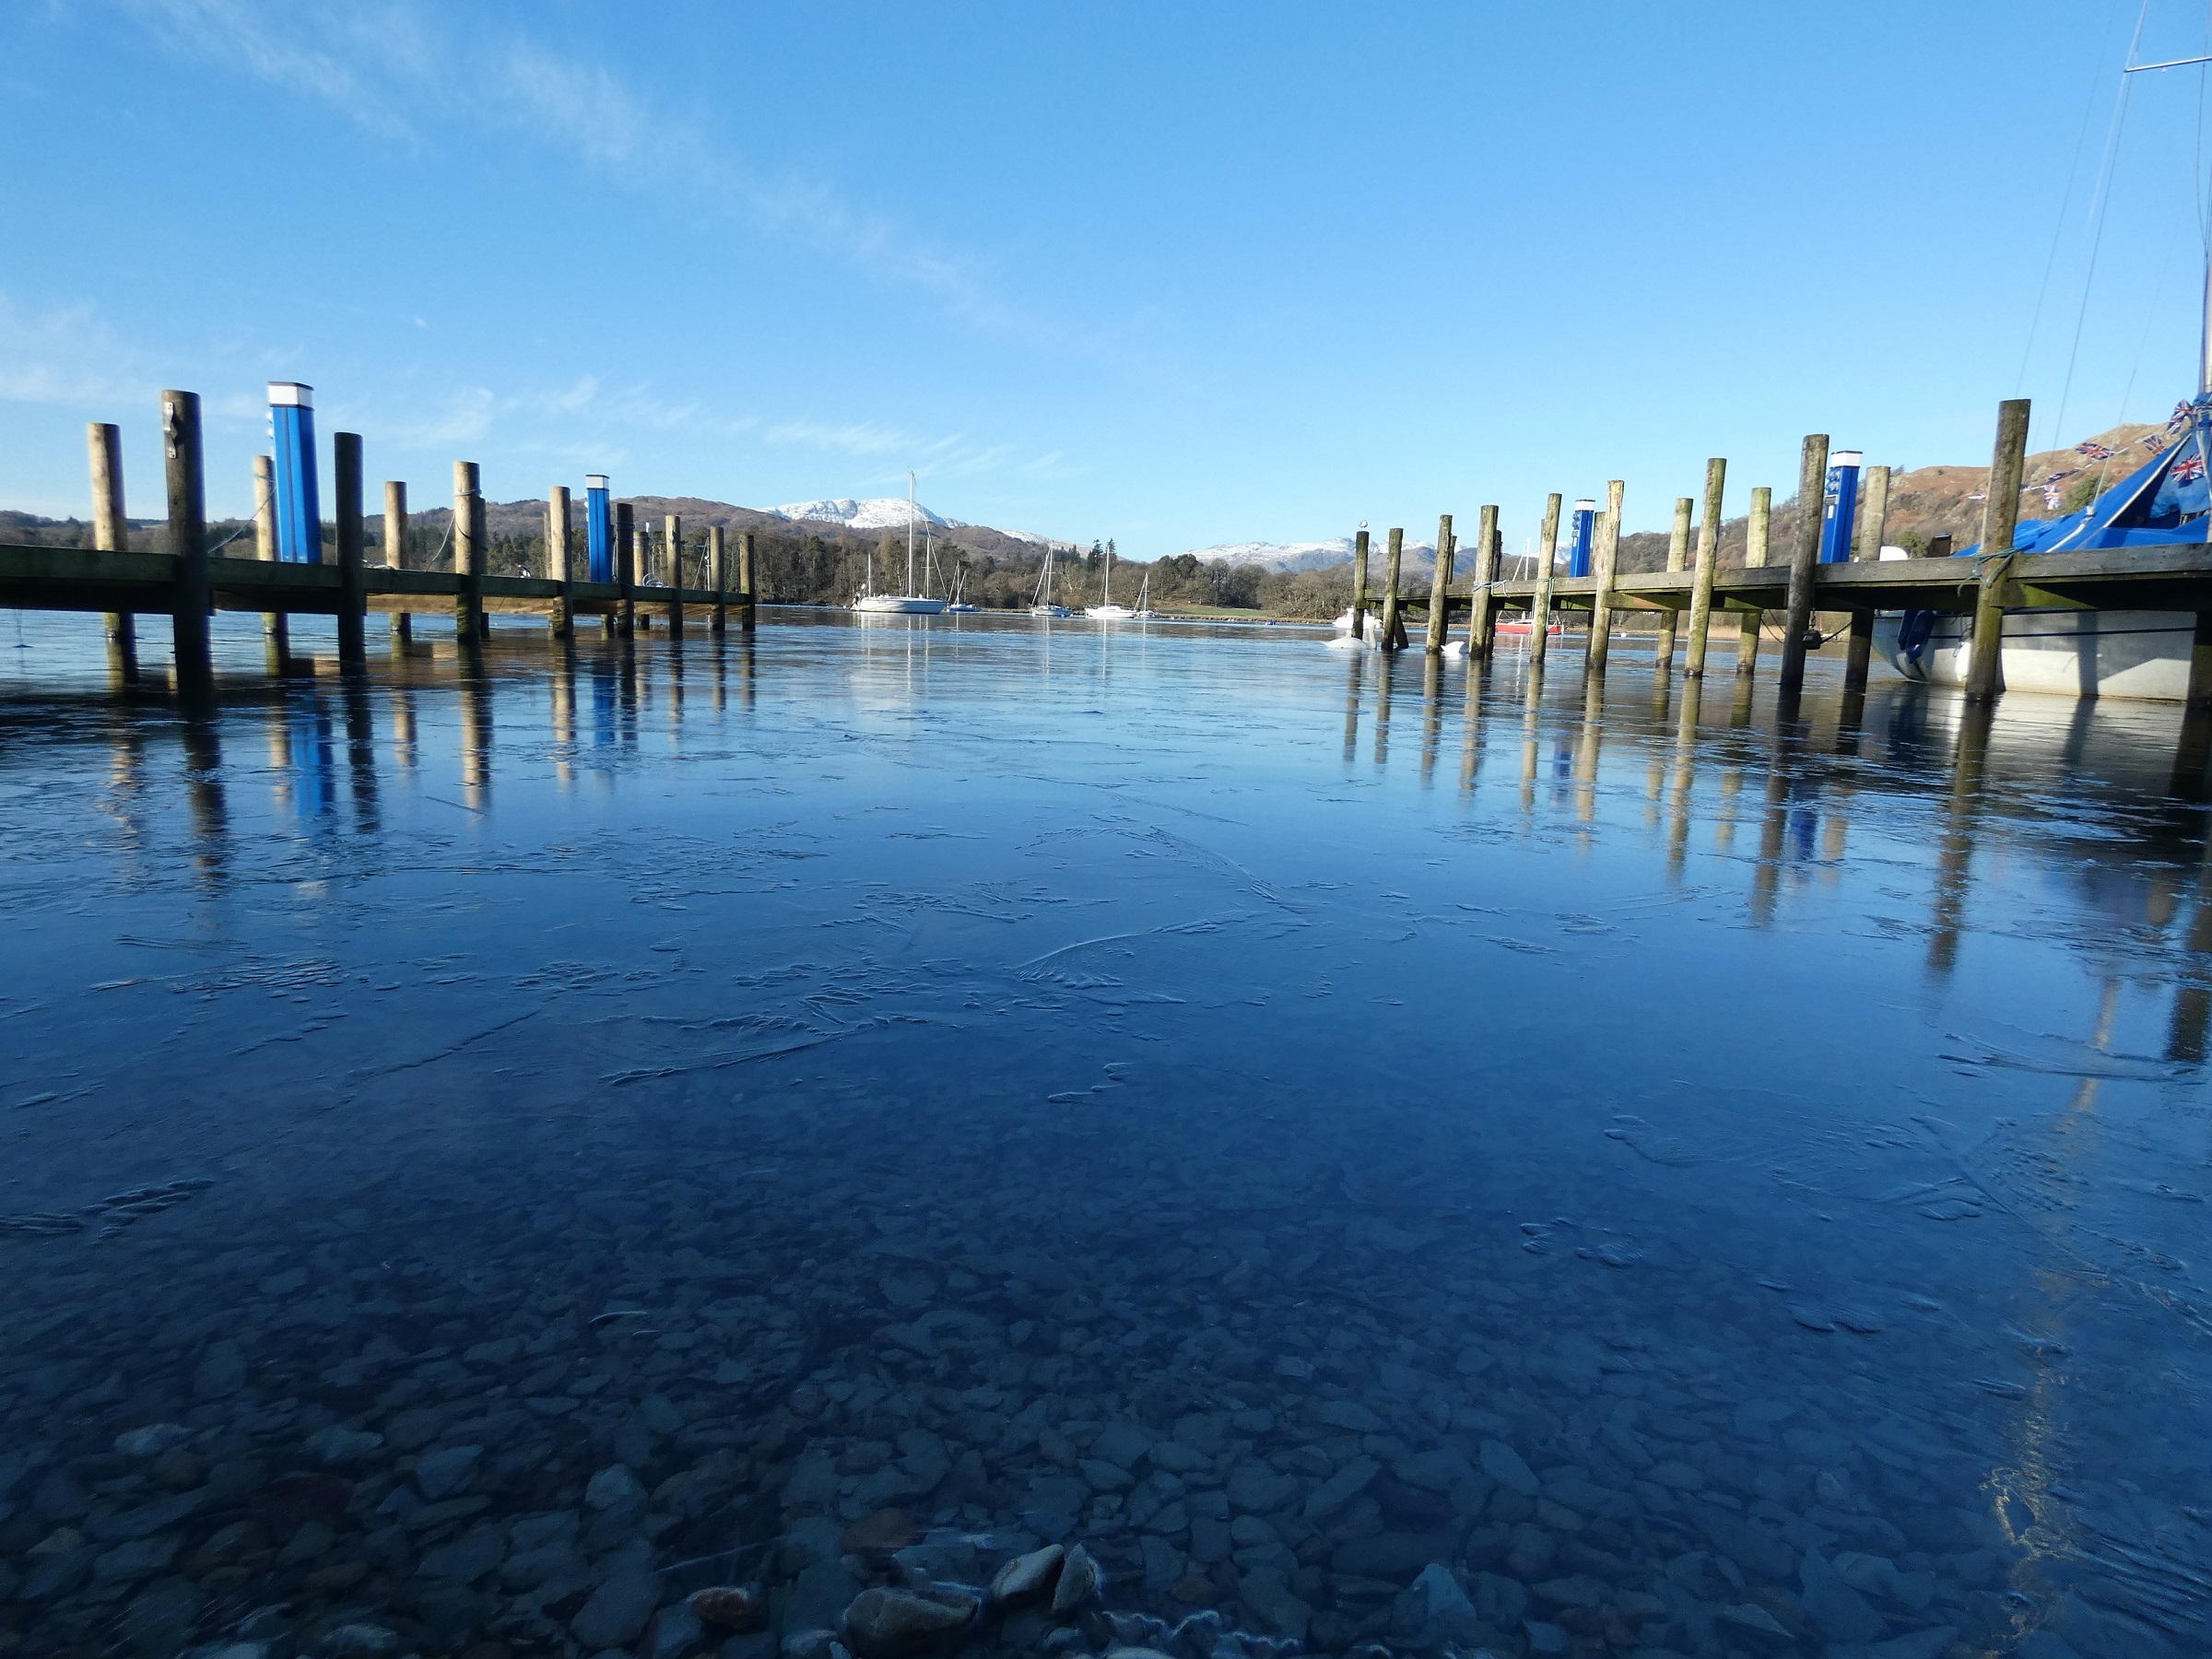 BEAUTIFUL: The view of a frozen Windermere